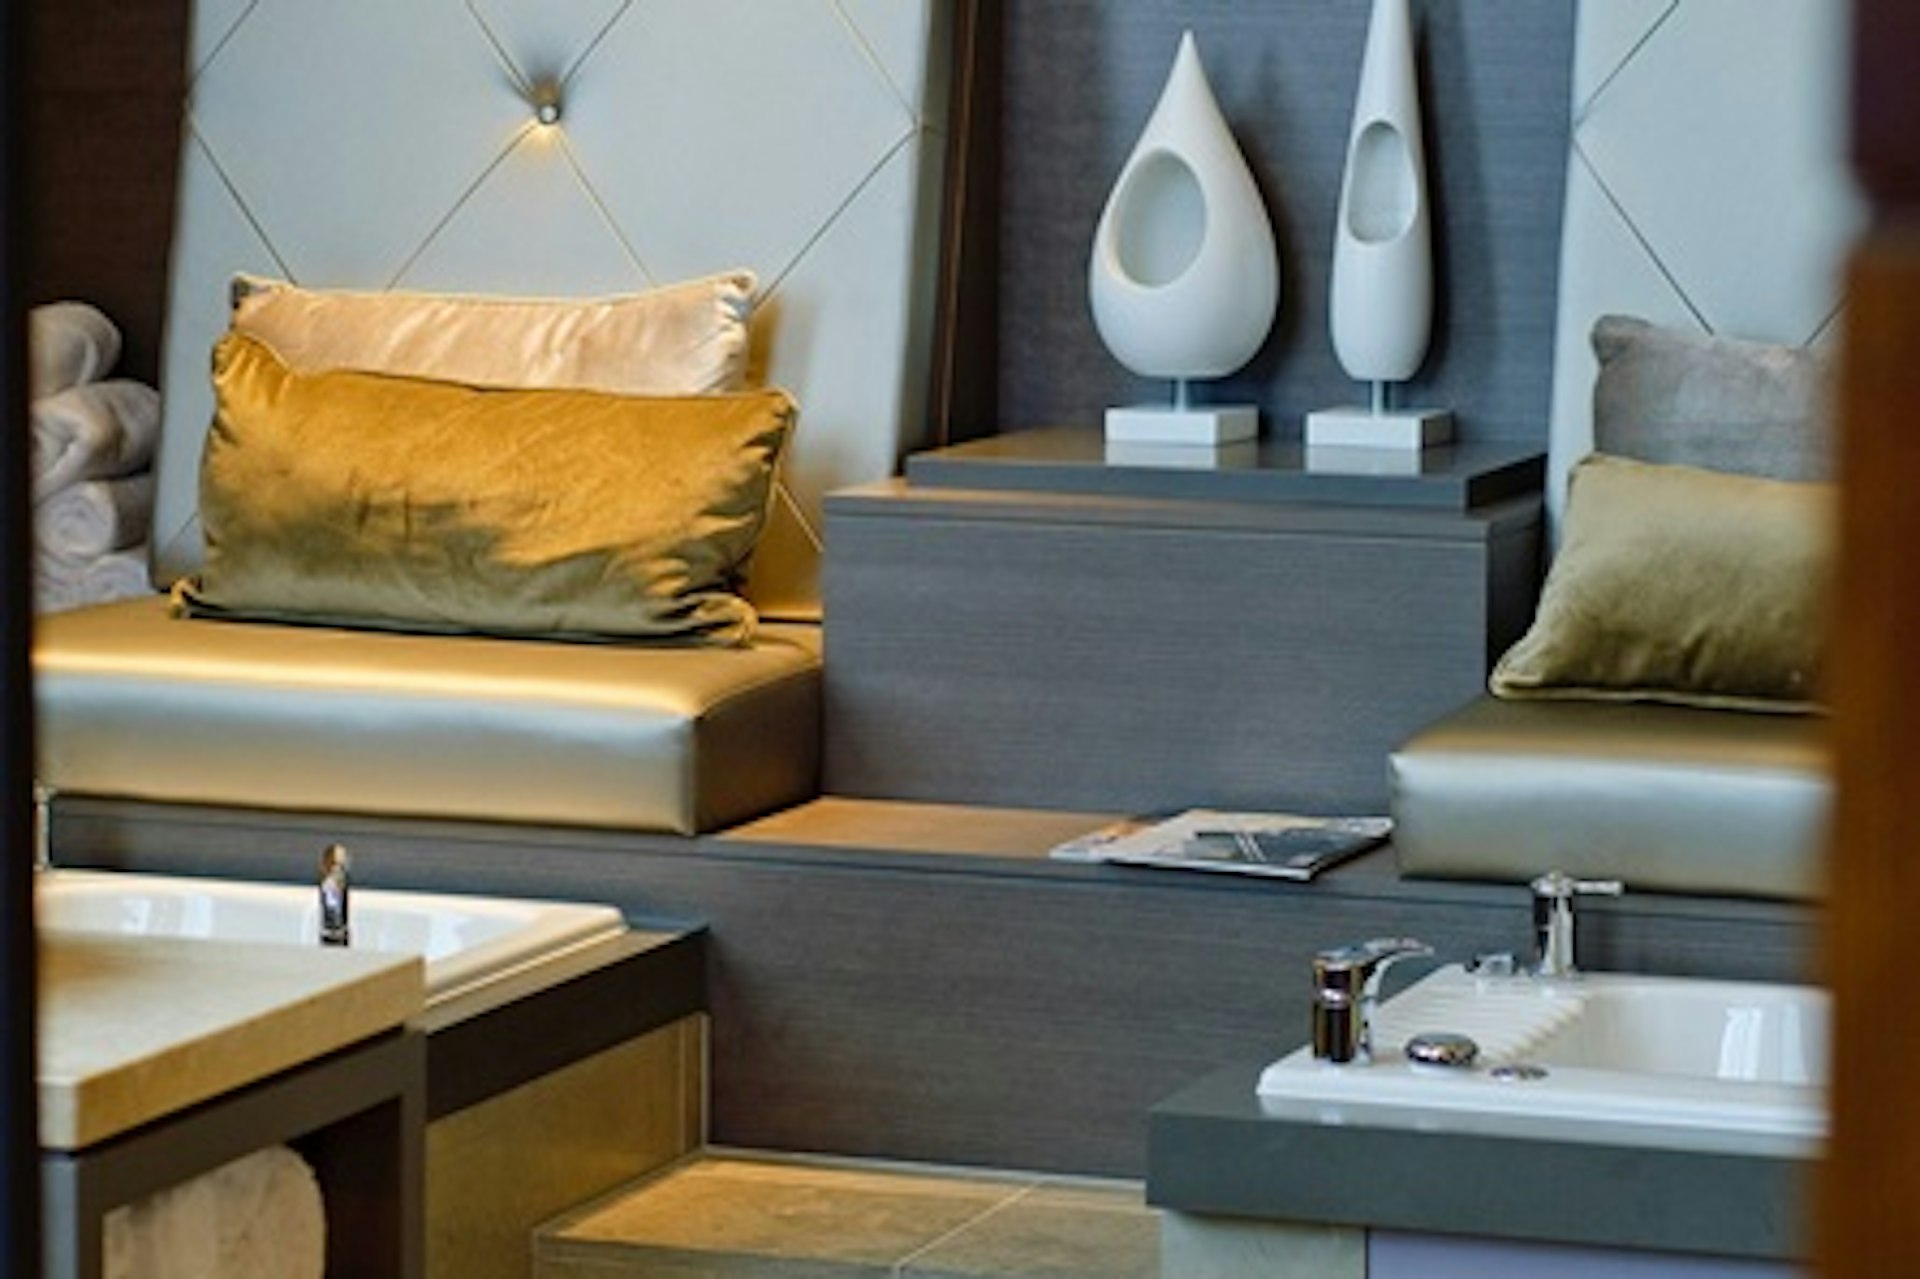 Refreshing Pamper Time with Two Treatments and Dining for Two at Luxury SoSPA at the 5* Sofitel London St James 3